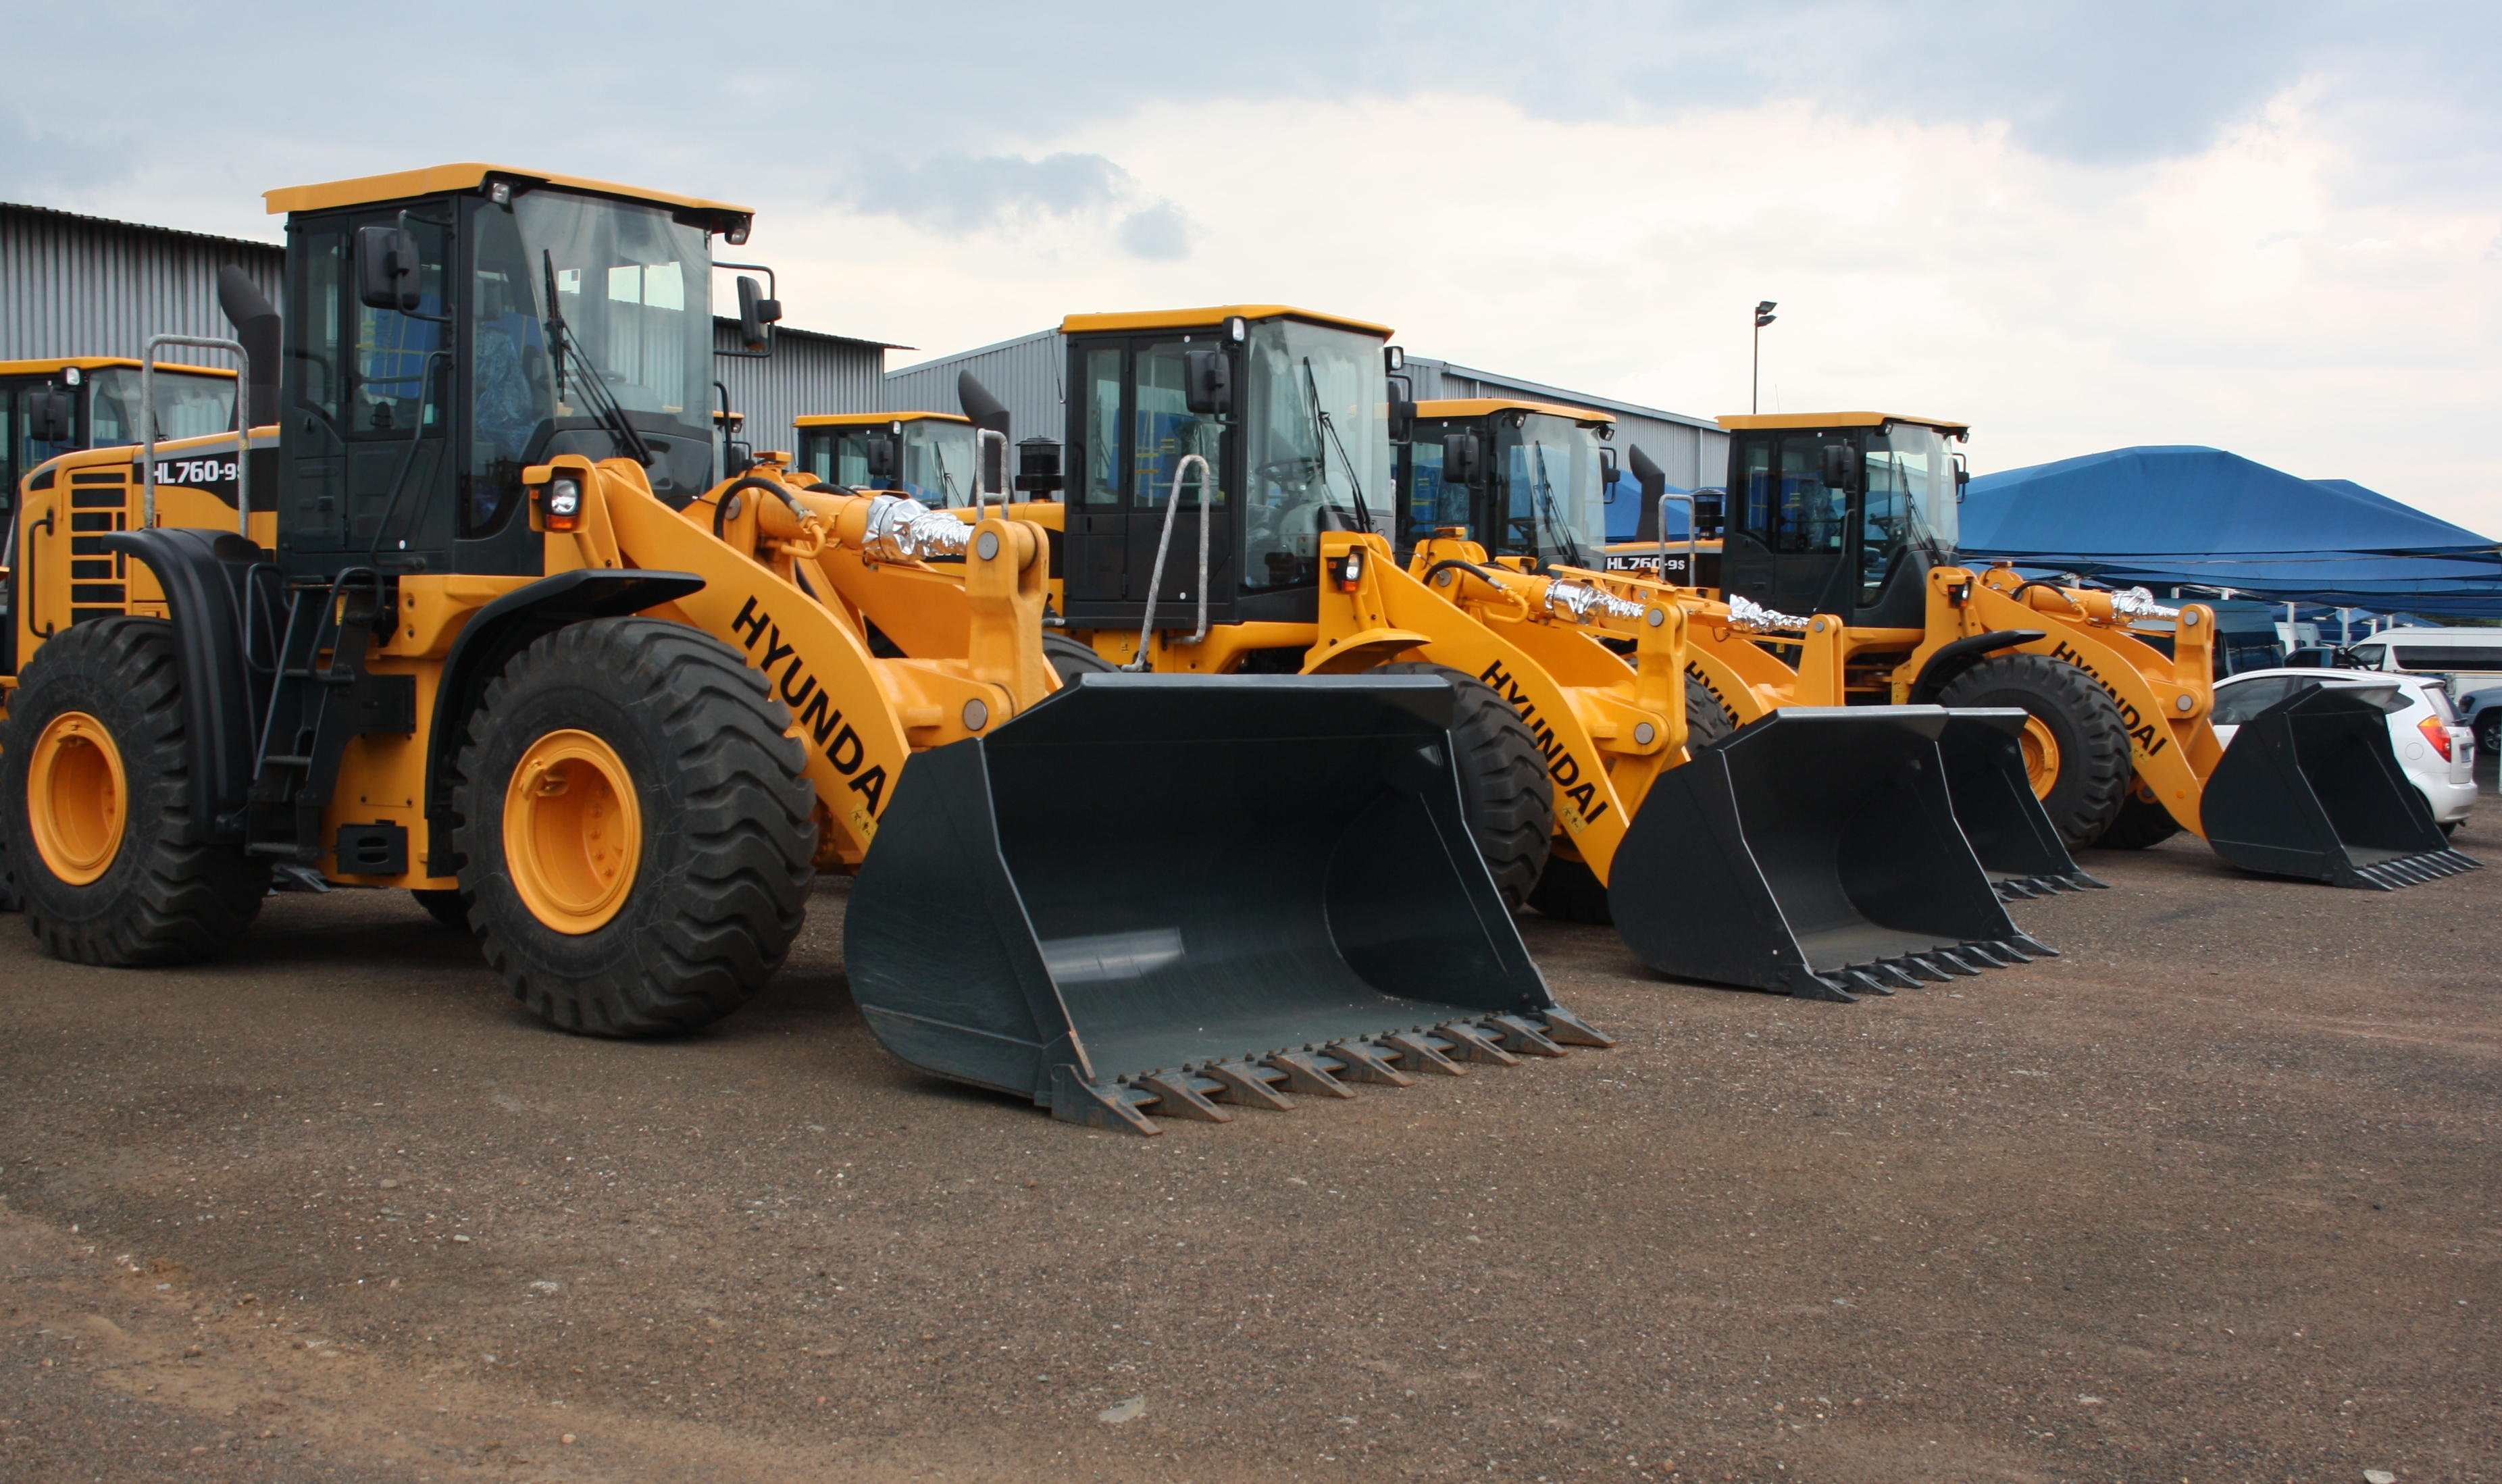 Hyundai Wheel Loader Backgrounds, Compatible - PC, Mobile, Gadgets| 3704x2197 px